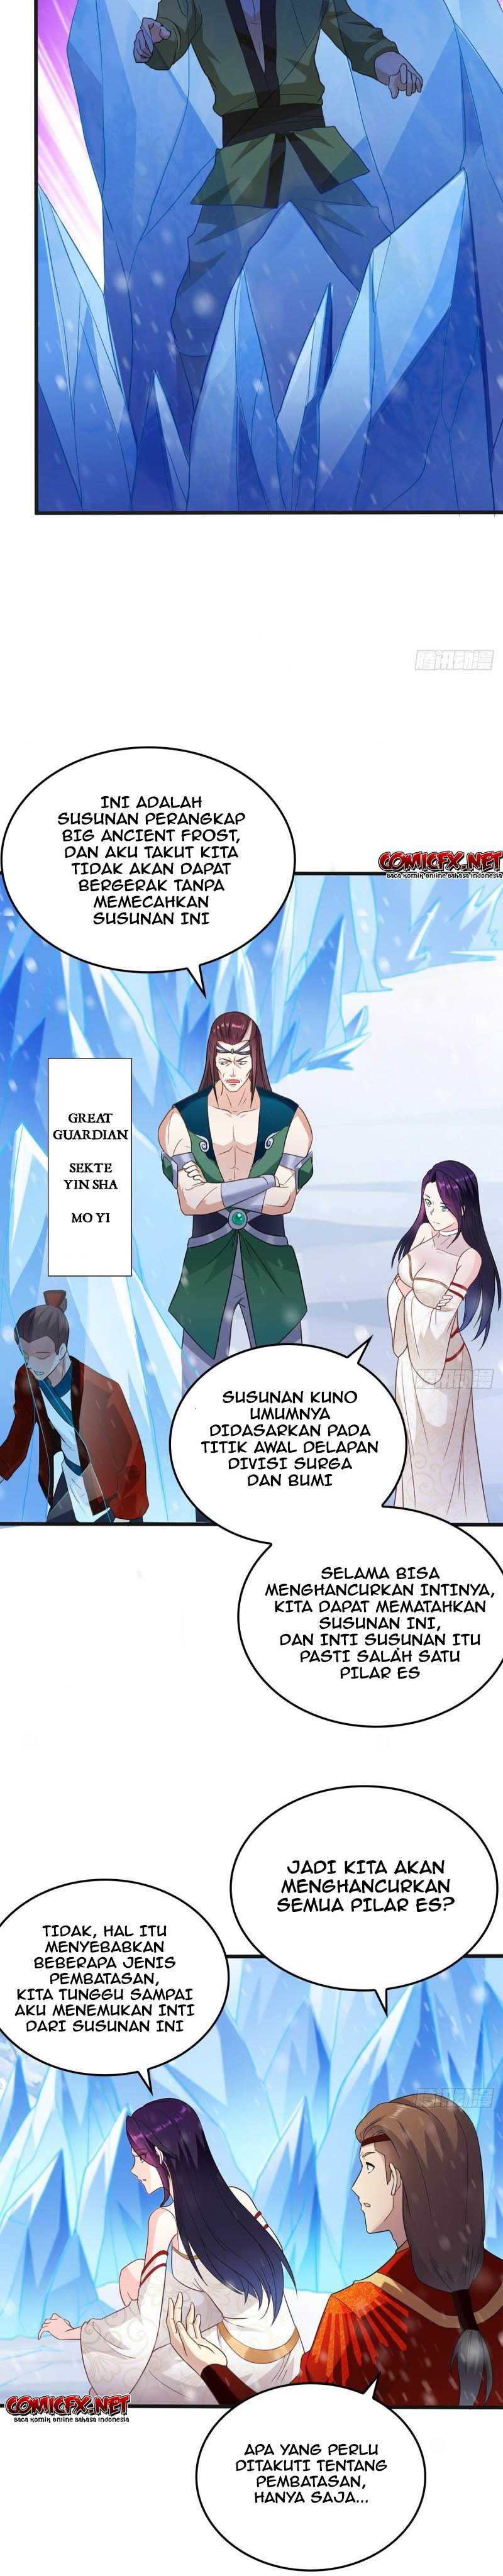 Forced To Become the Villain’s Son-in-law Chapter 80